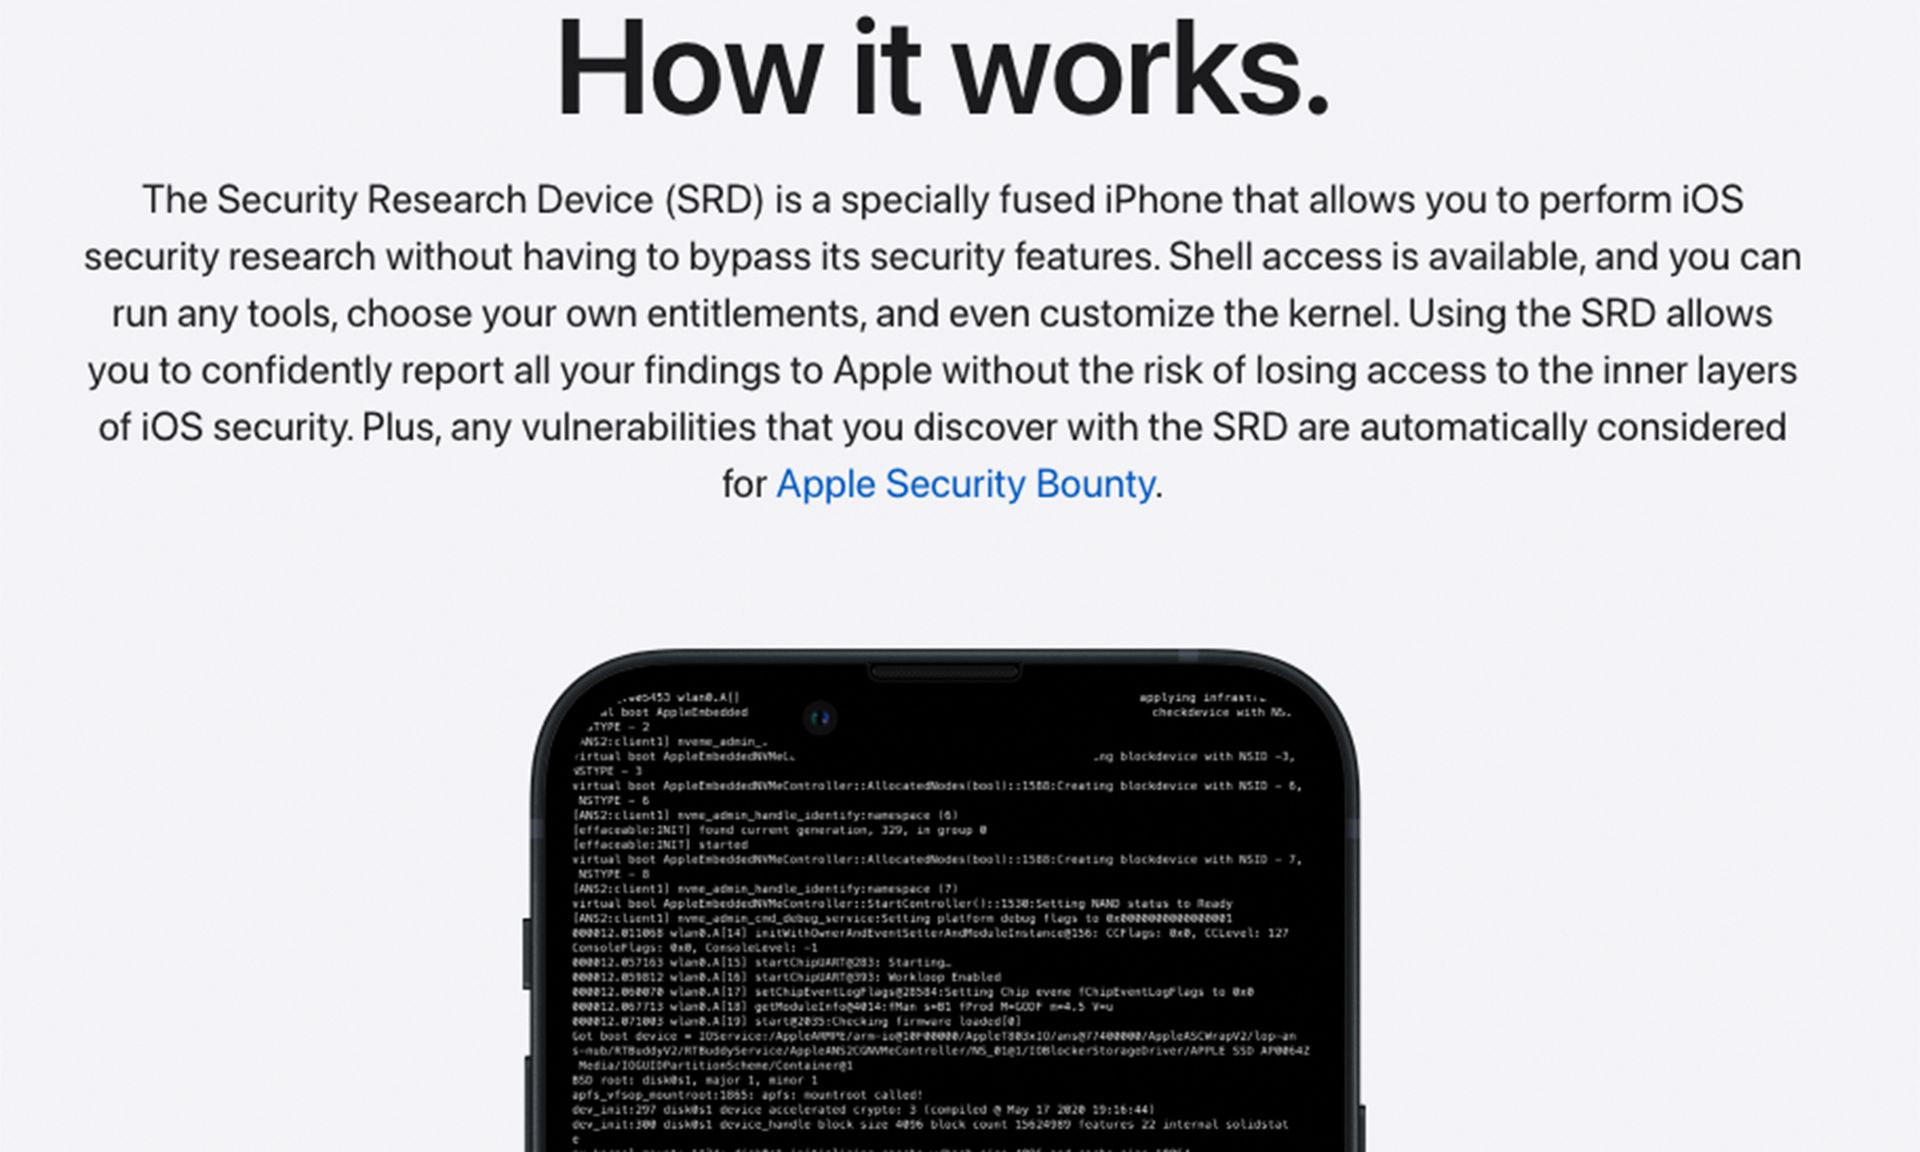 Screenshot from Apple's new security website